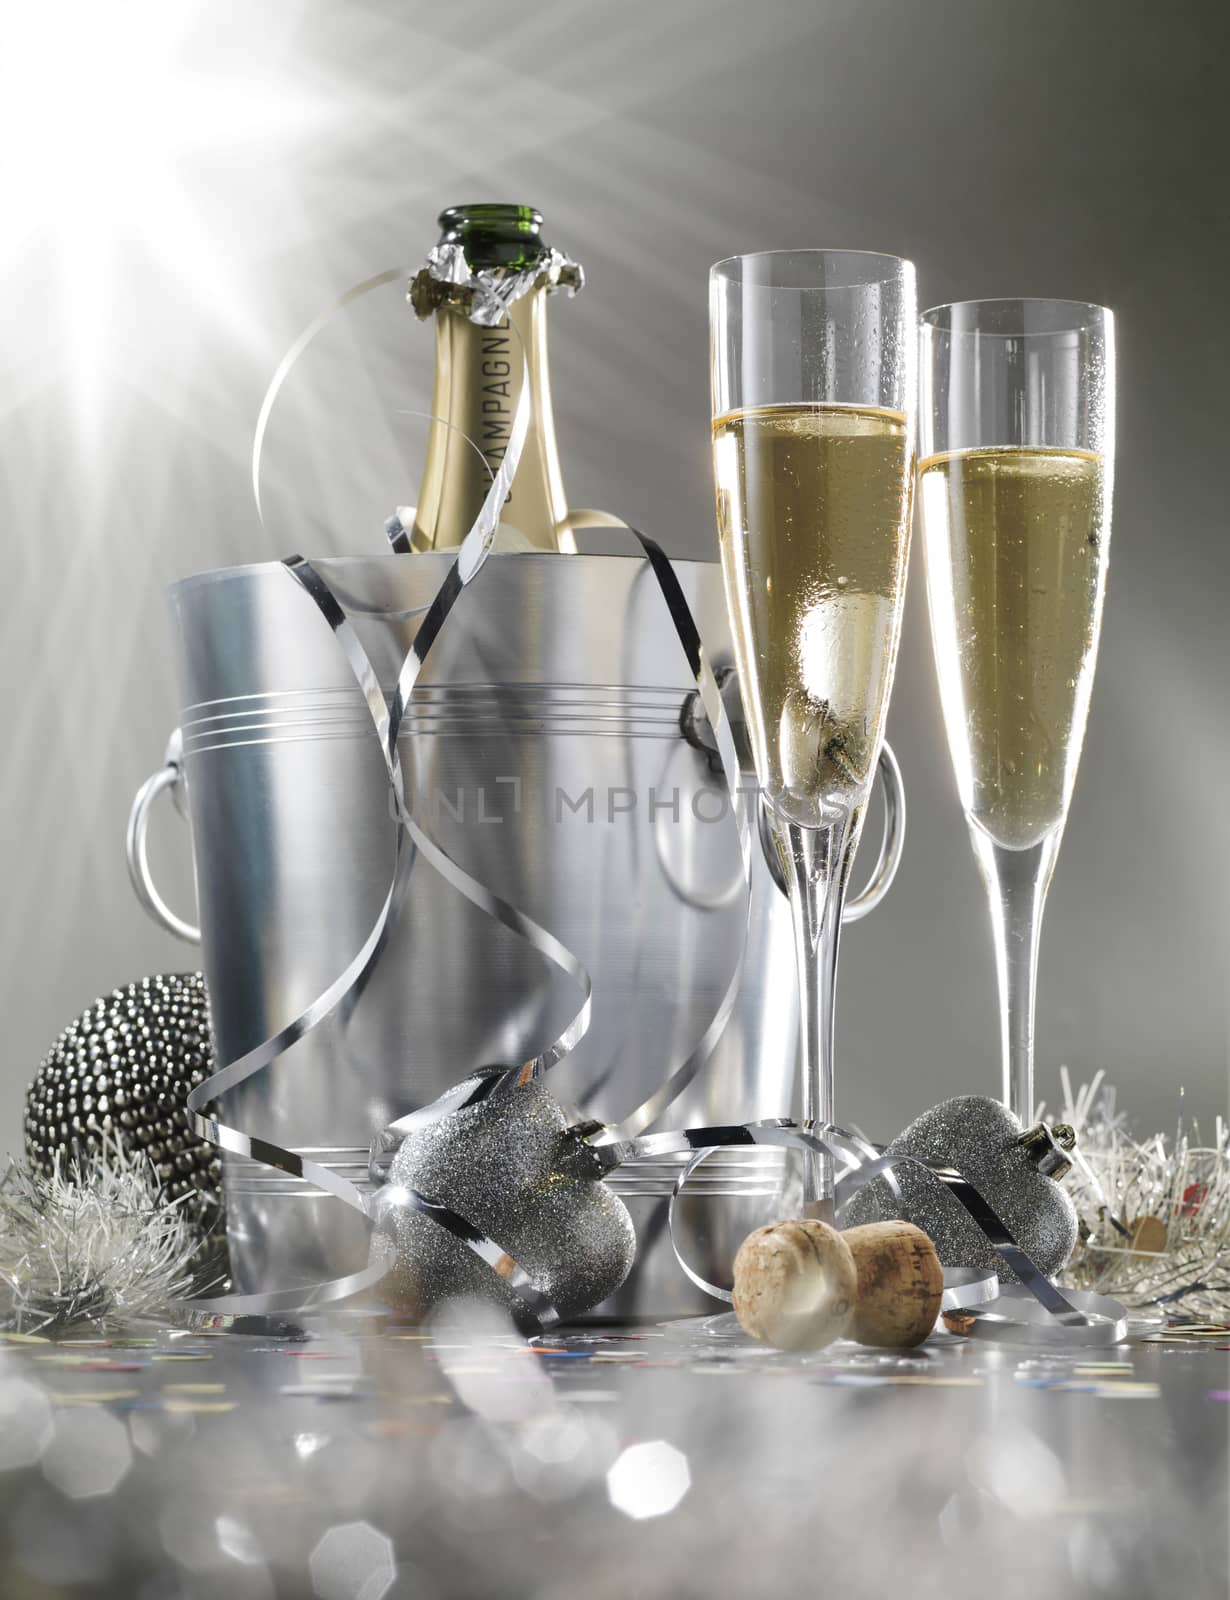 Two glasses of champagne with bottle in cooler on a silver background, selective focus by janssenkruseproductions